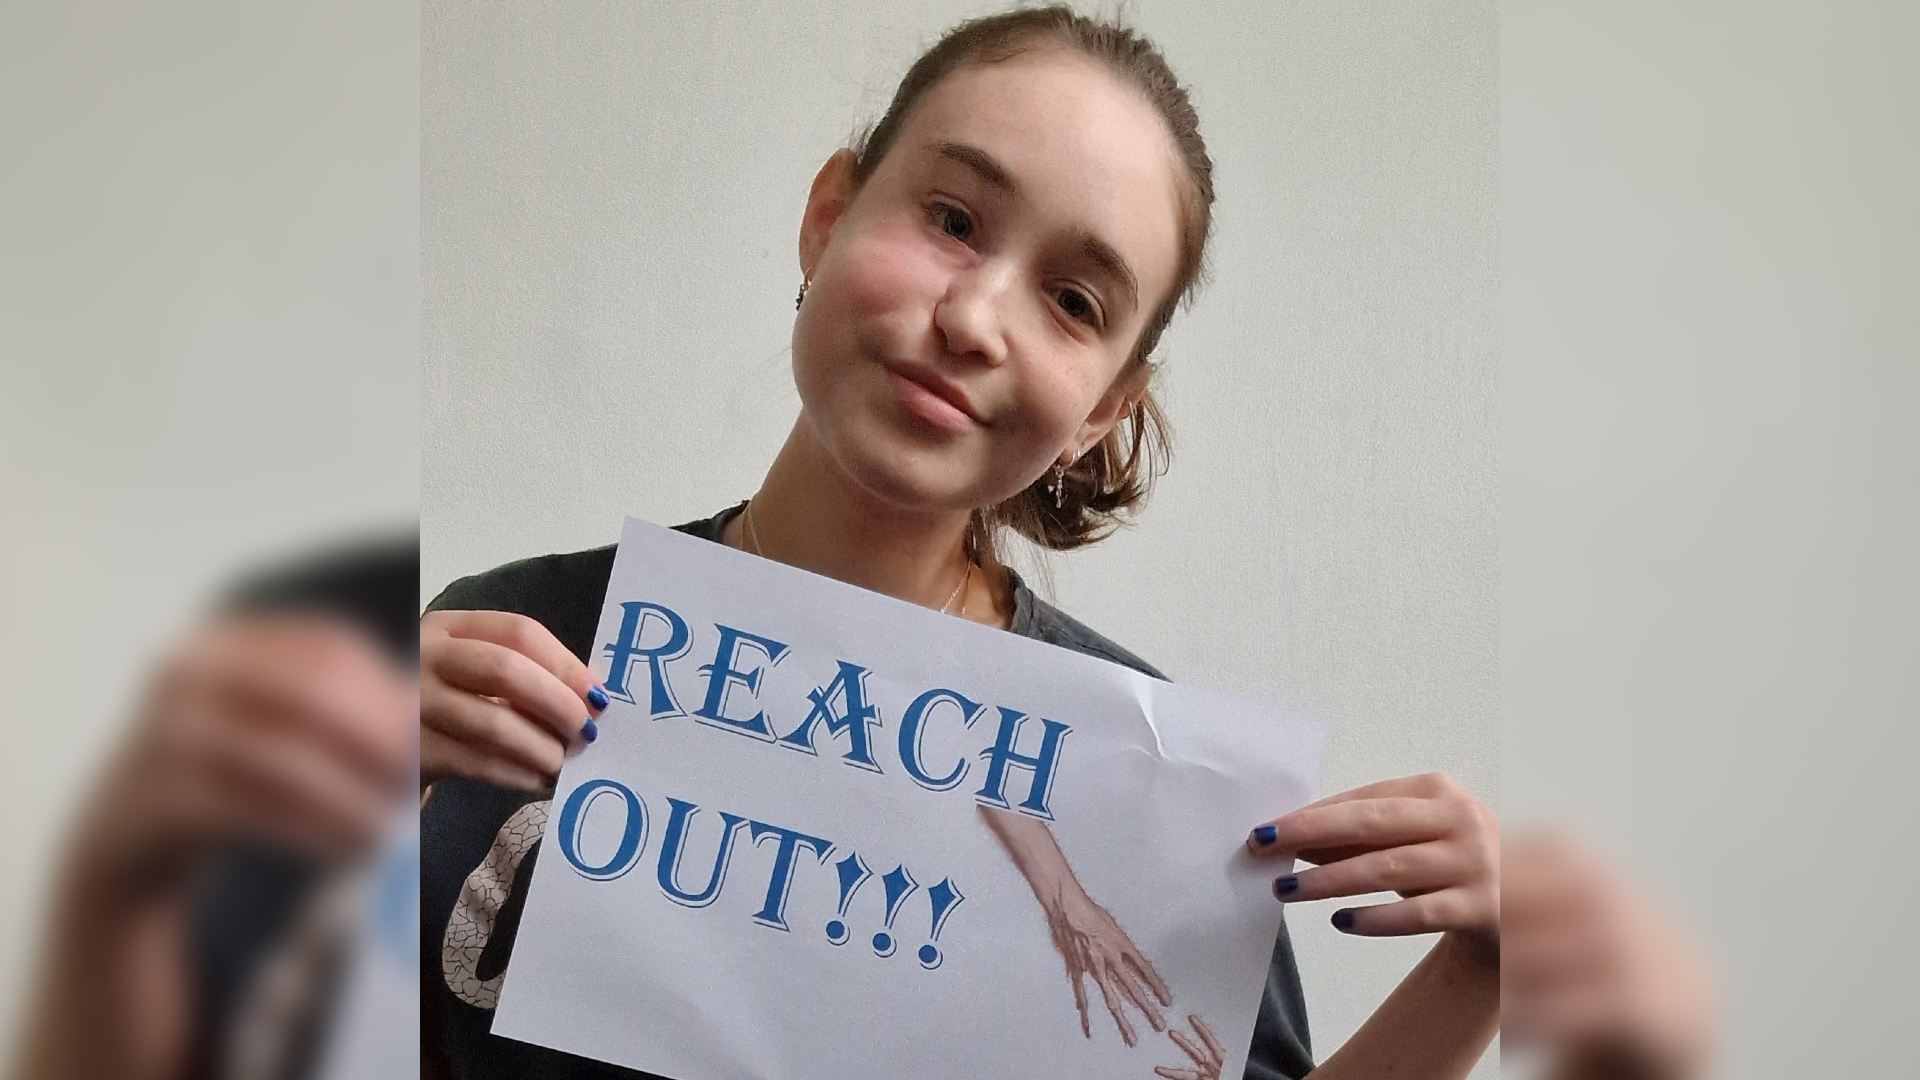 Girl with facial scarring holds up sign saying Reach Out